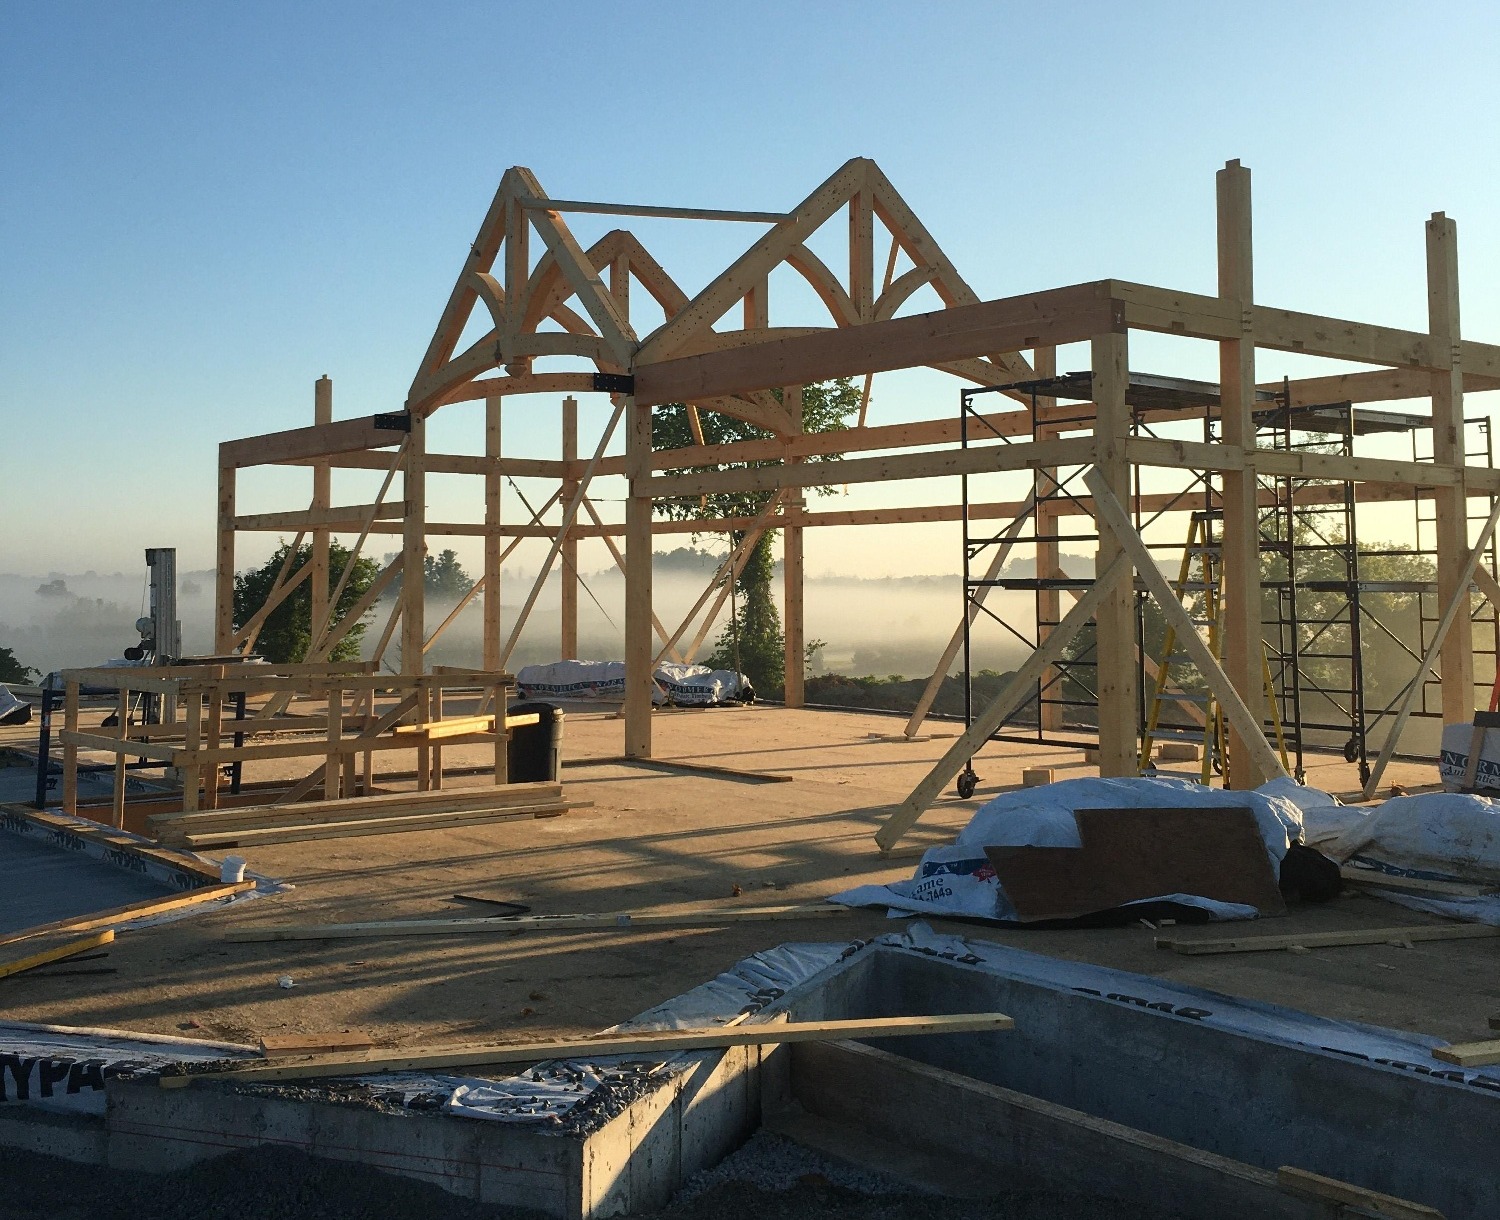 Construction Loan Normerica Timber Frame Homes New Construction Photos Morning View